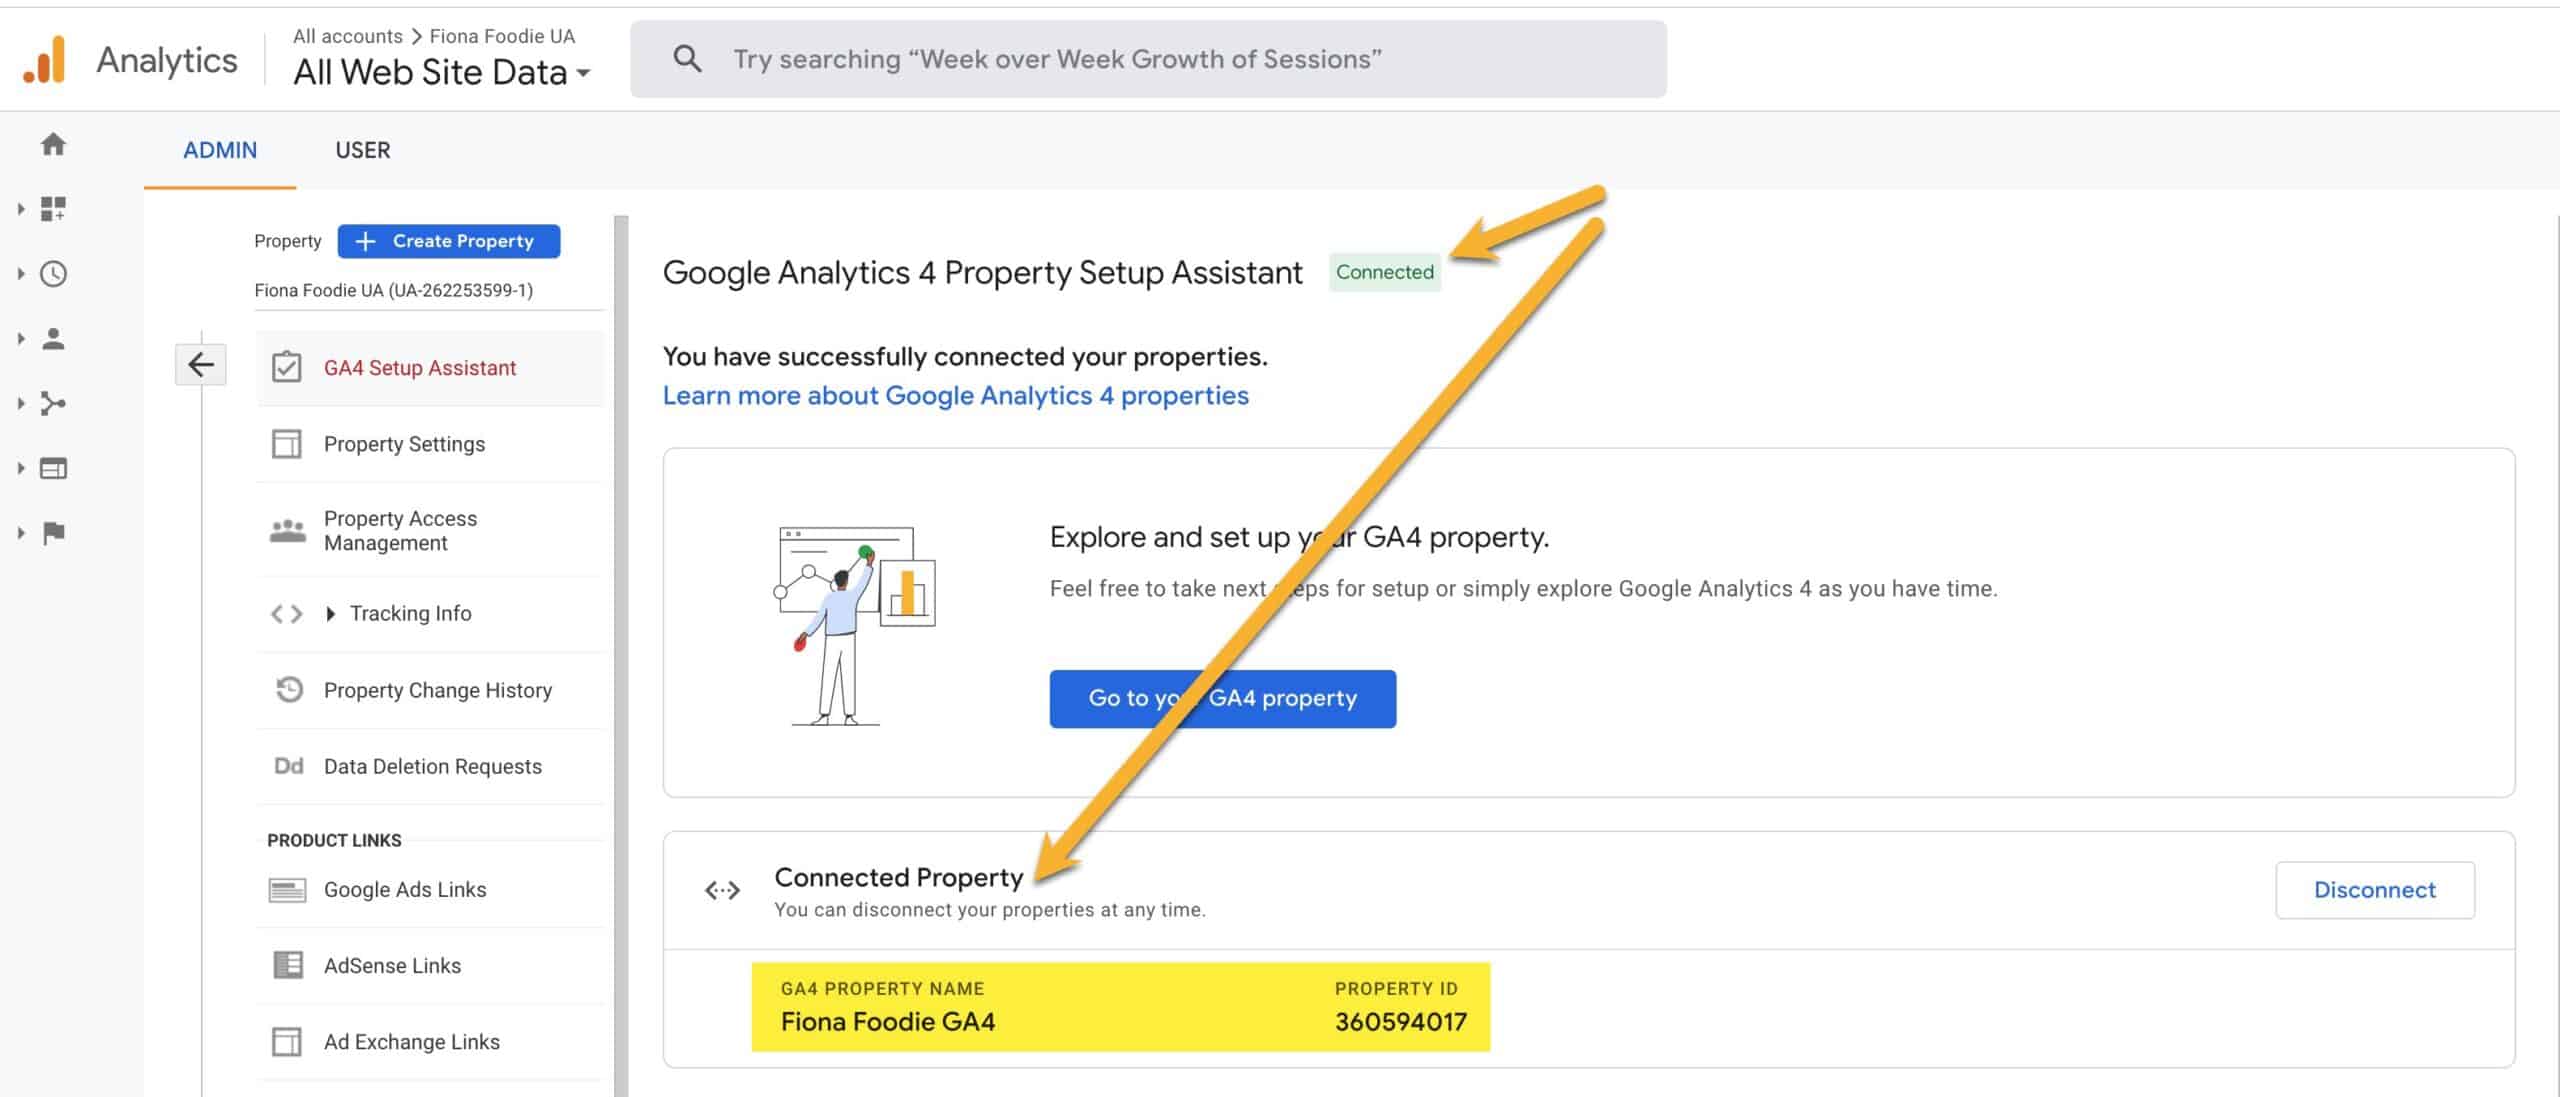 Google Analytics dashboard showing a GA4 connected property details in the GA4 Setup Assistant